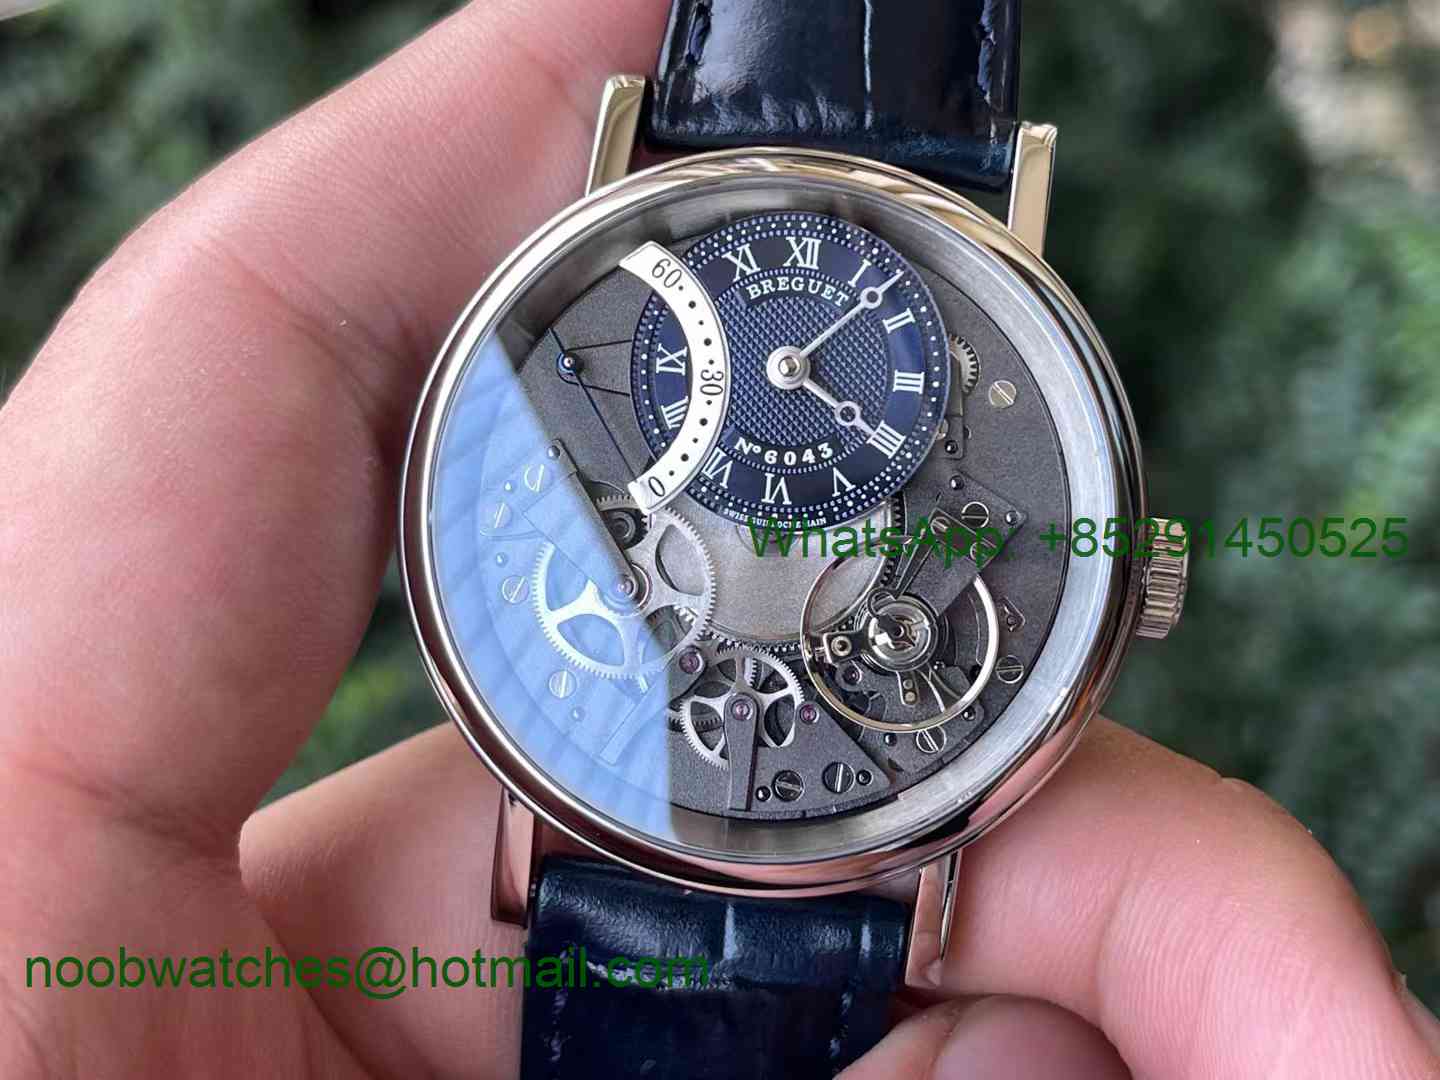 Replica Breguet Tradition 7097 Blue Skeleton Dial on Leather ZF A505